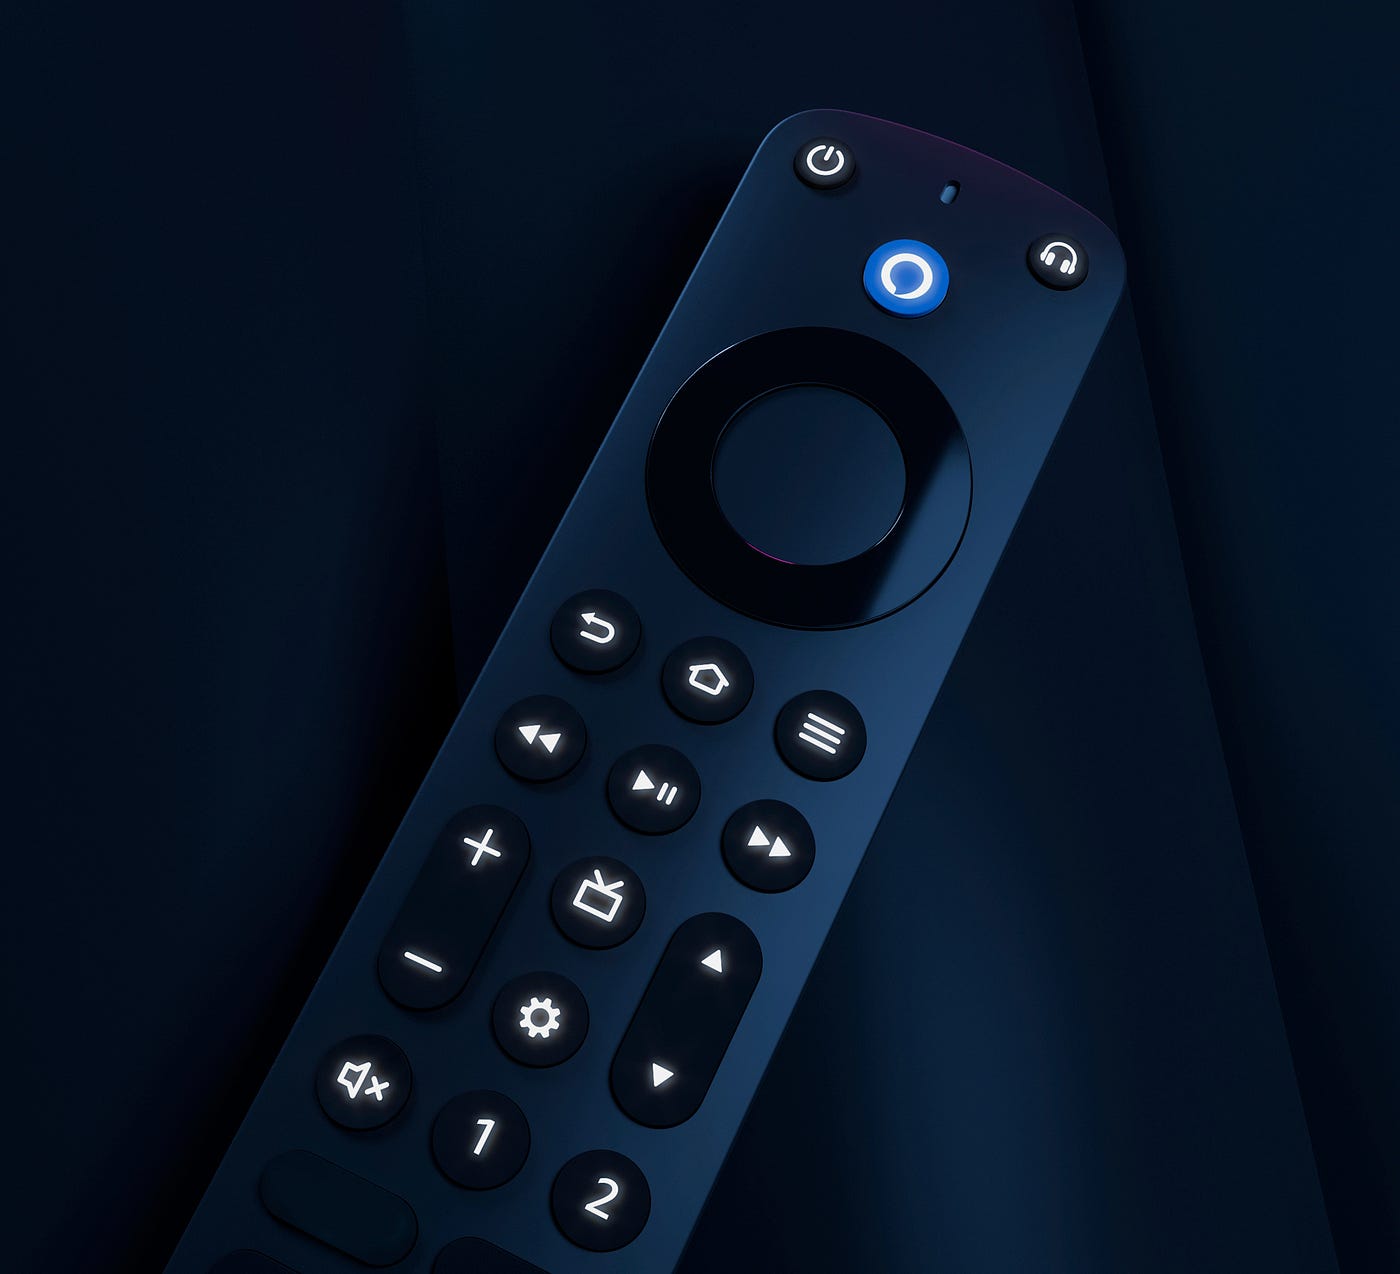 announces new Fire TV Sticks with enhanced features